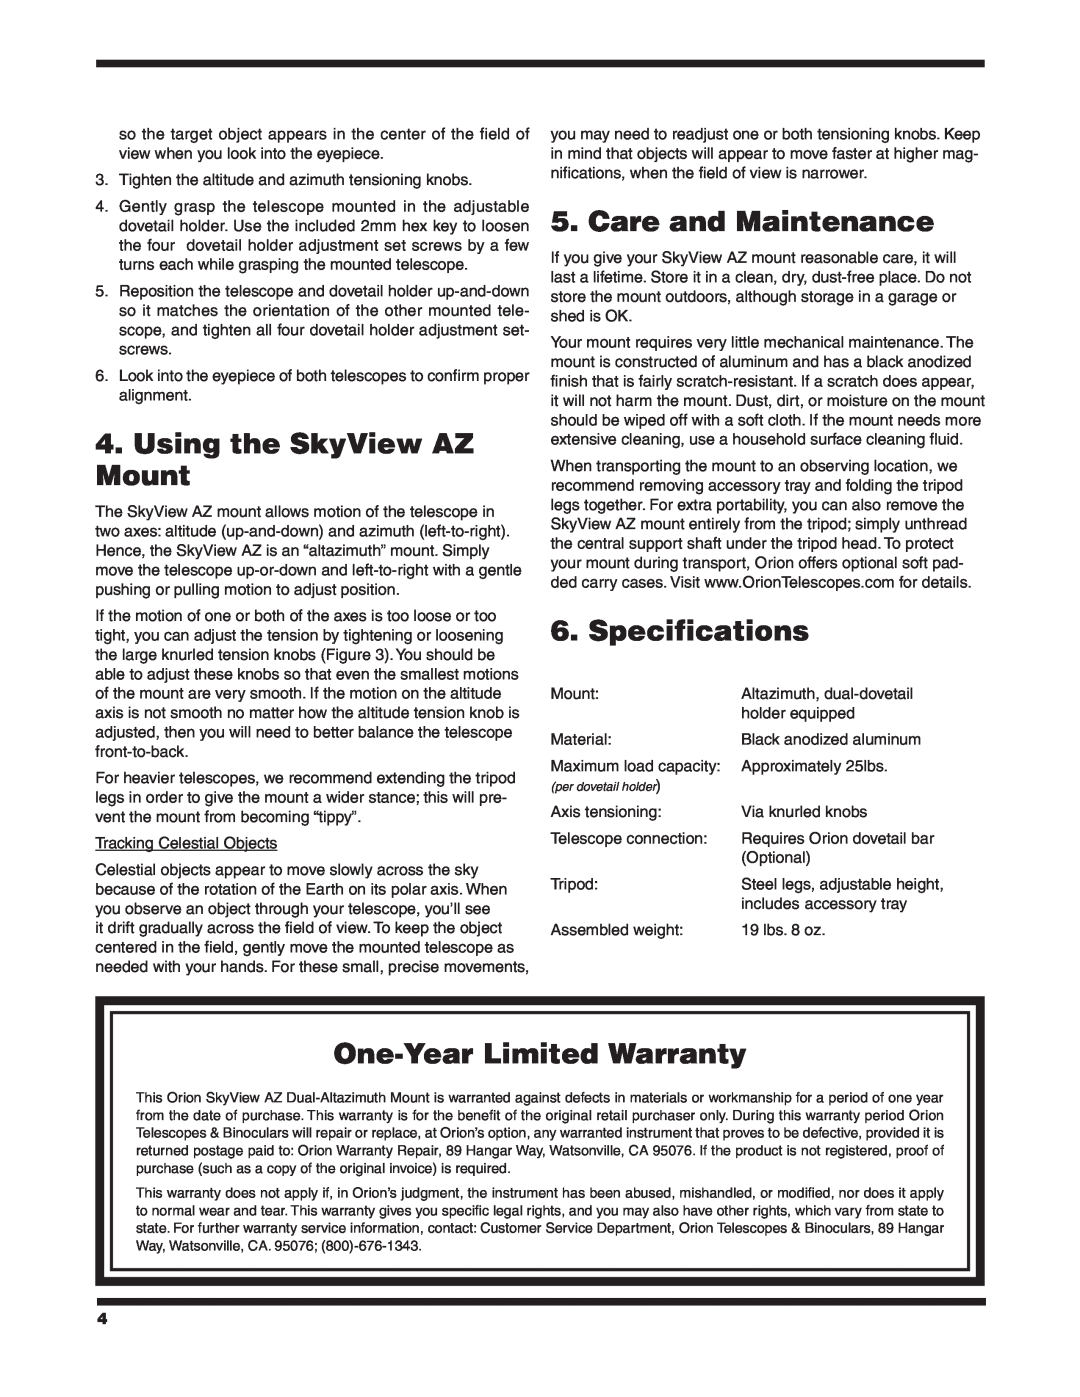 Orion 9017 instruction manual Using the SkyView AZ Mount, Care and Maintenance, Specifications, One-Year Limited Warranty 